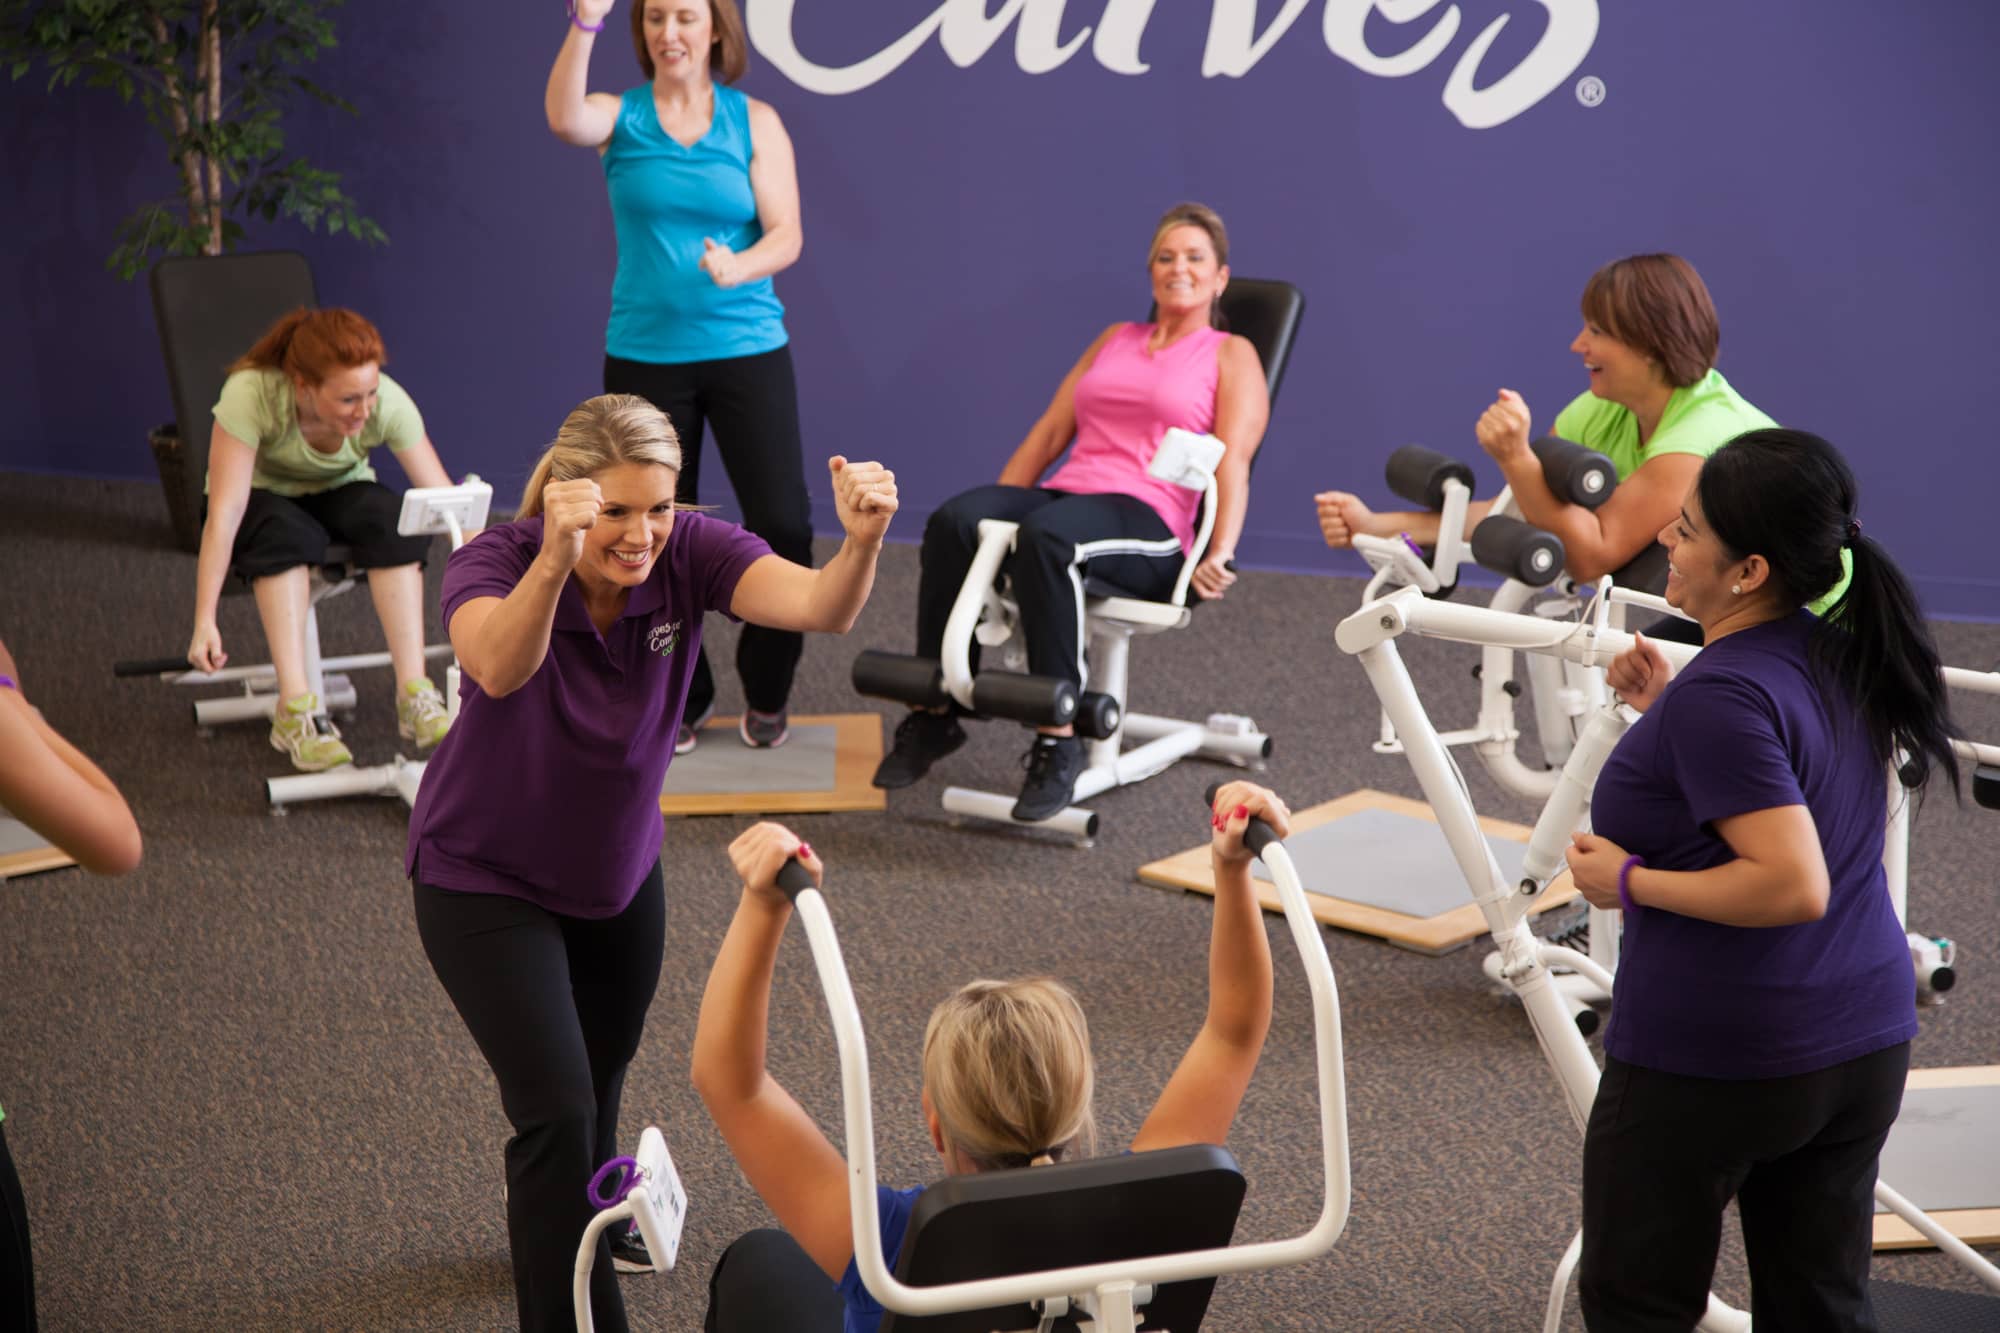 Group members at curves workout